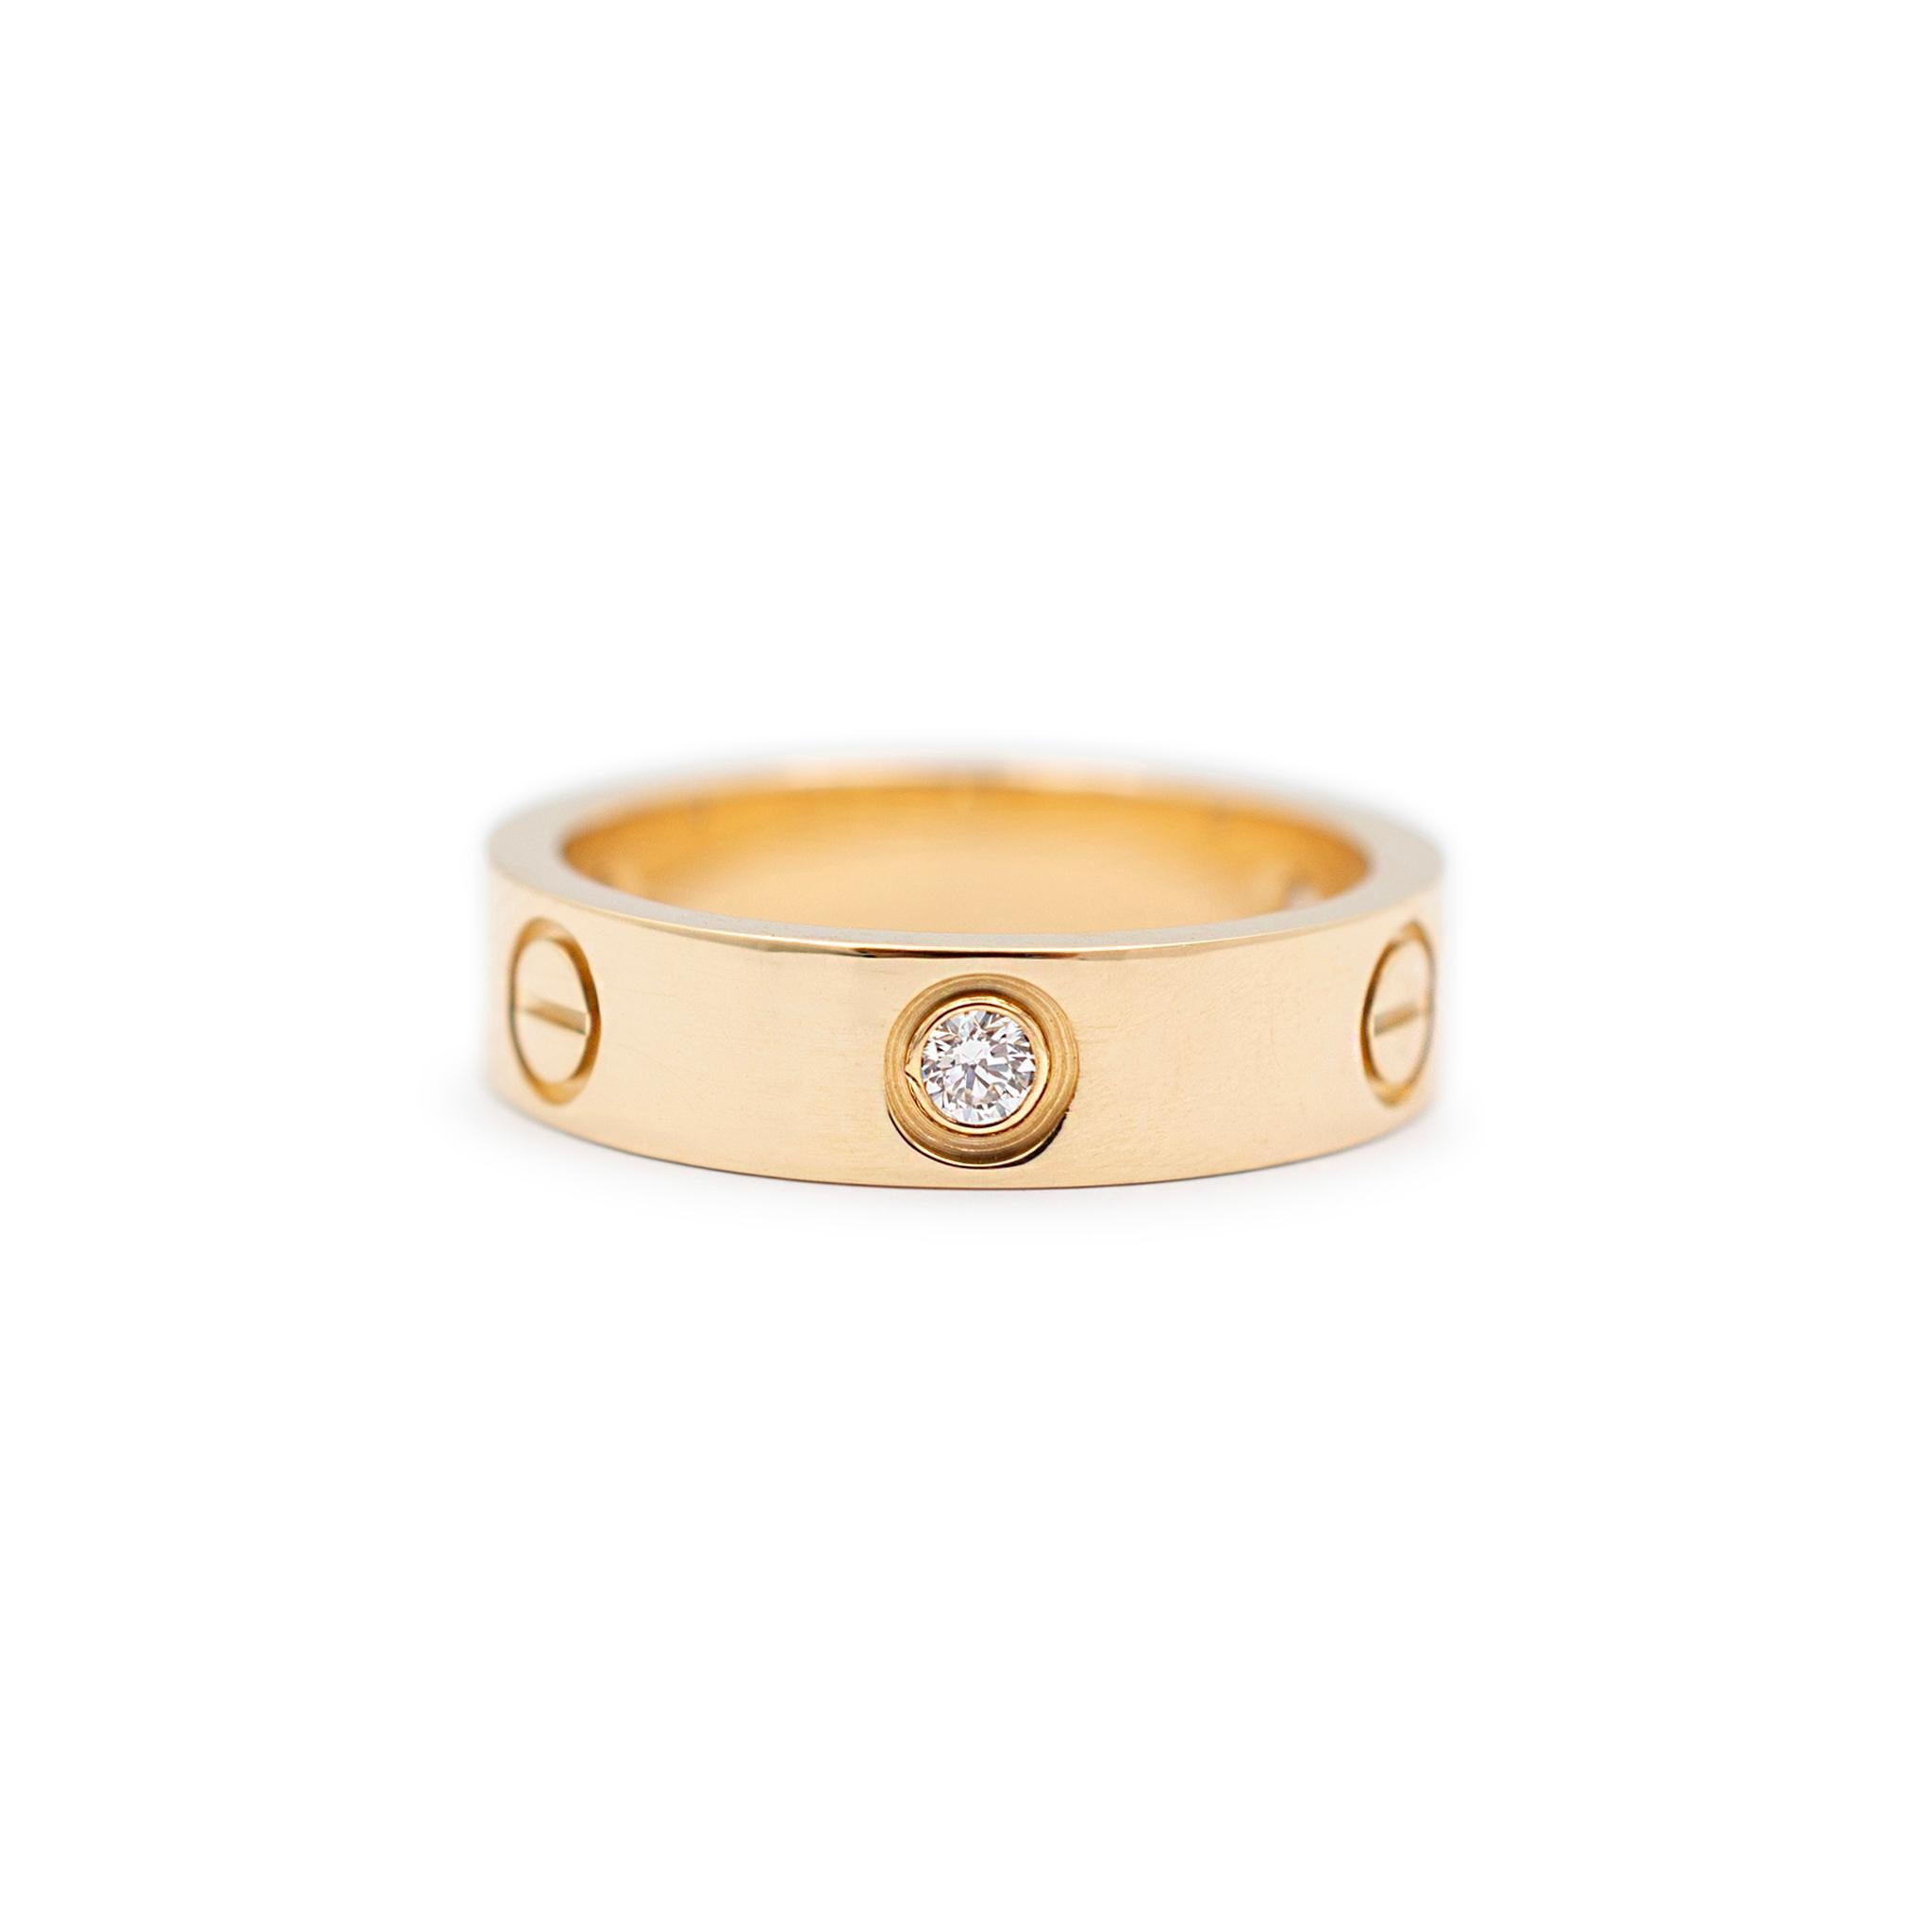 Brand: Cartier 

Gender: Ladies

Metal Type: Yellow Gold

Ring Size: 8

Width: 5.50 mm

Weight: 8.93 grams

One ladies designer made polished 18K yellow gold, diamond band with a soft-square shank. The metal was tested and determined to be 18K